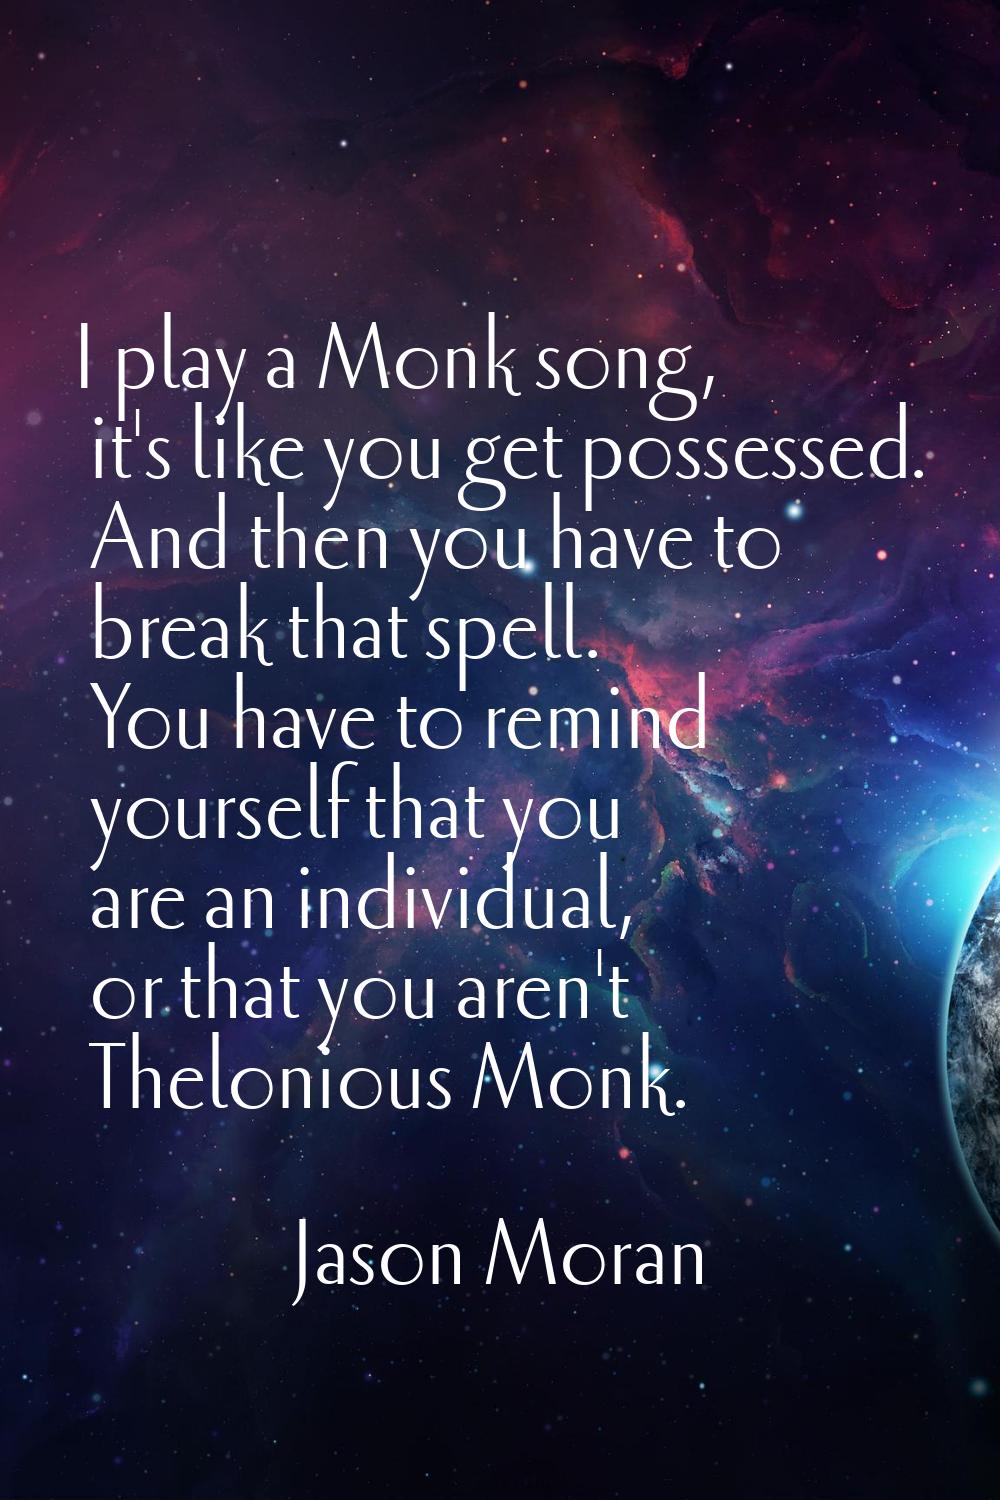 I play a Monk song, it's like you get possessed. And then you have to break that spell. You have to